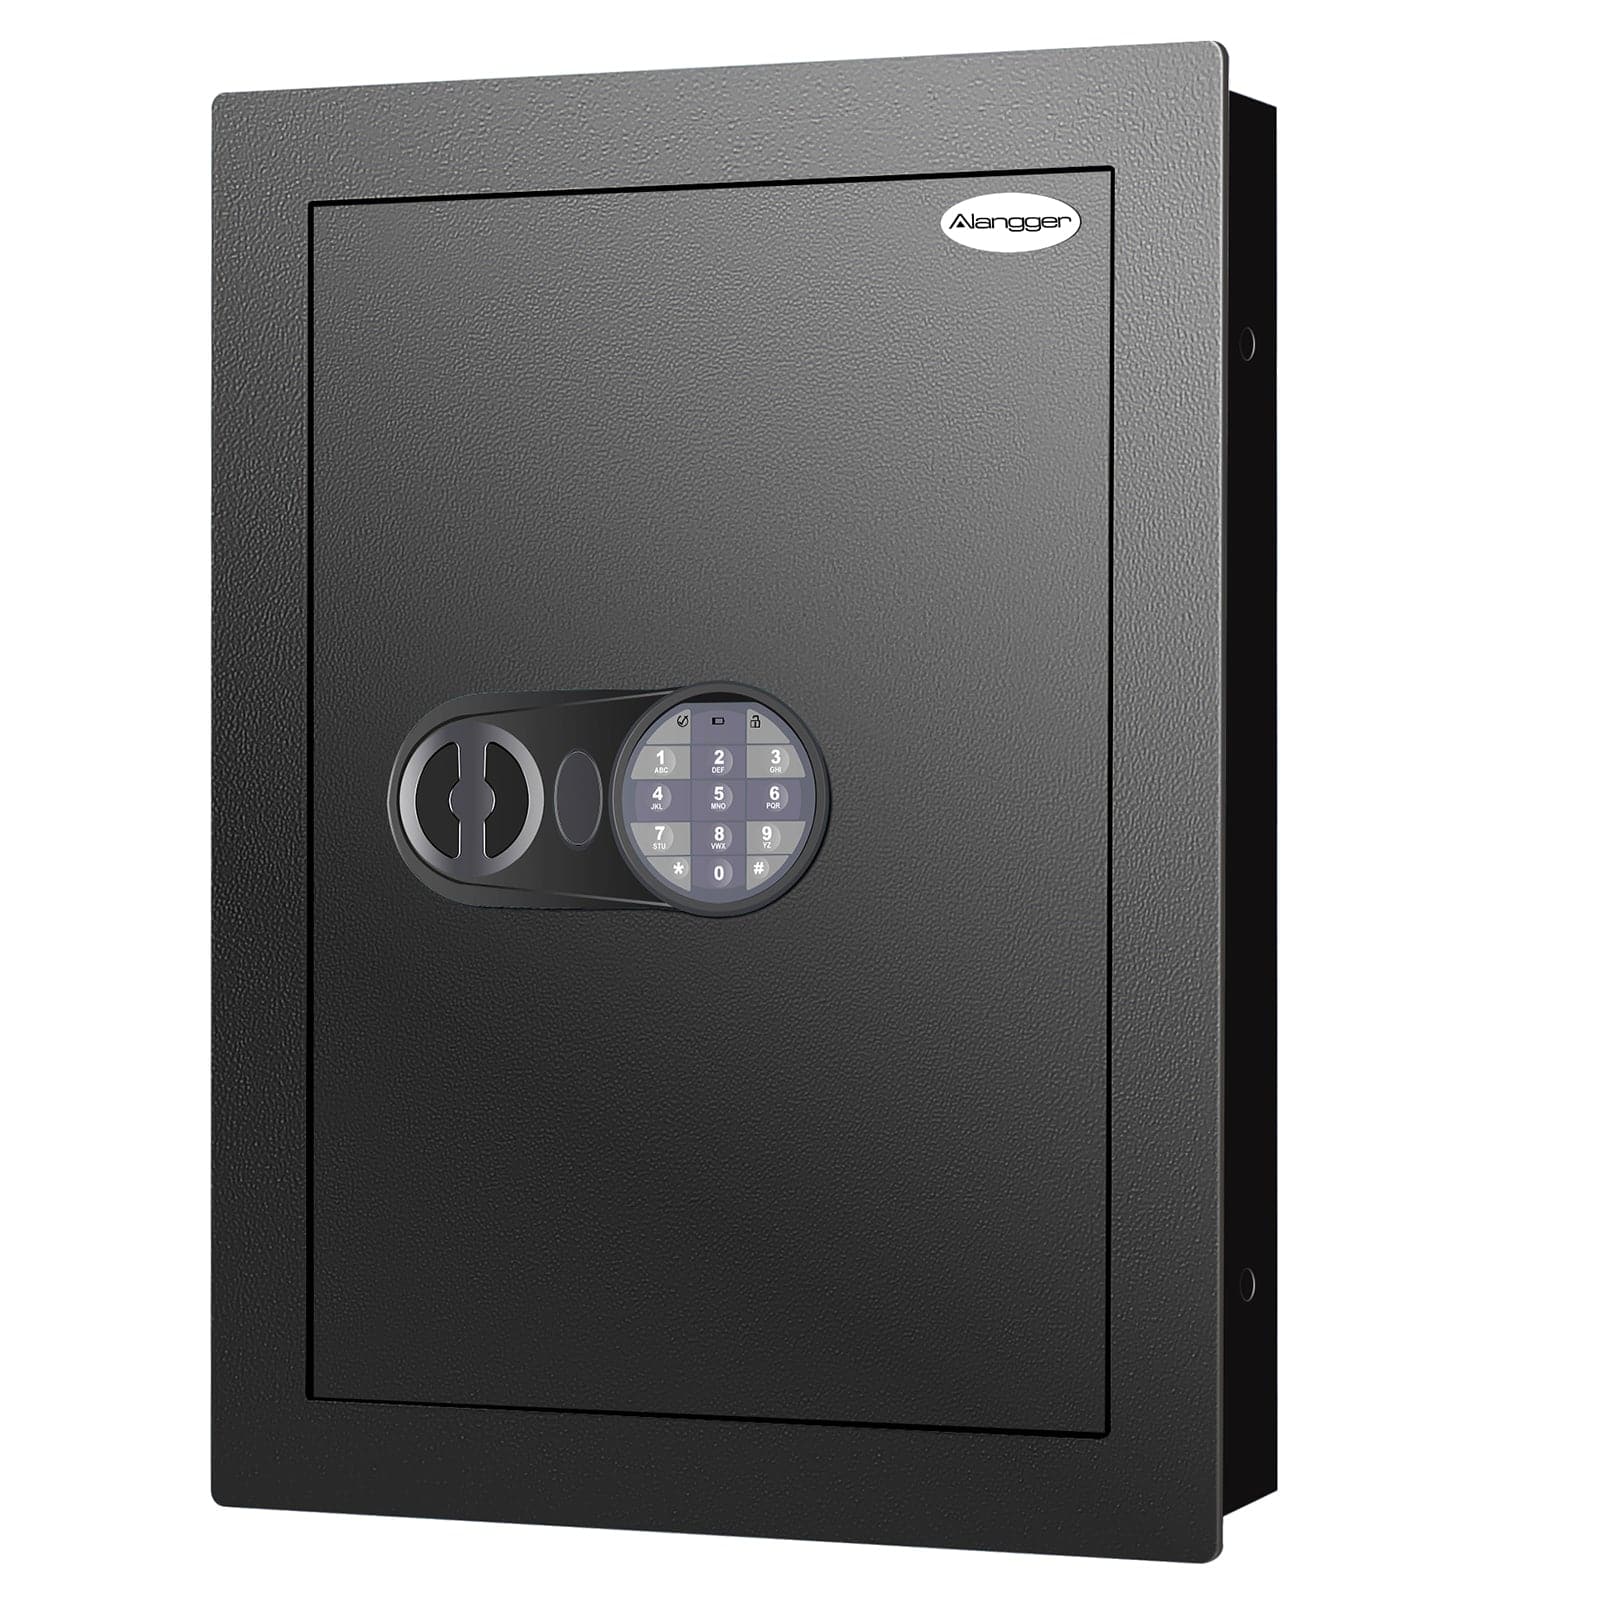 Wall Safe, Black, Small - LAWS006